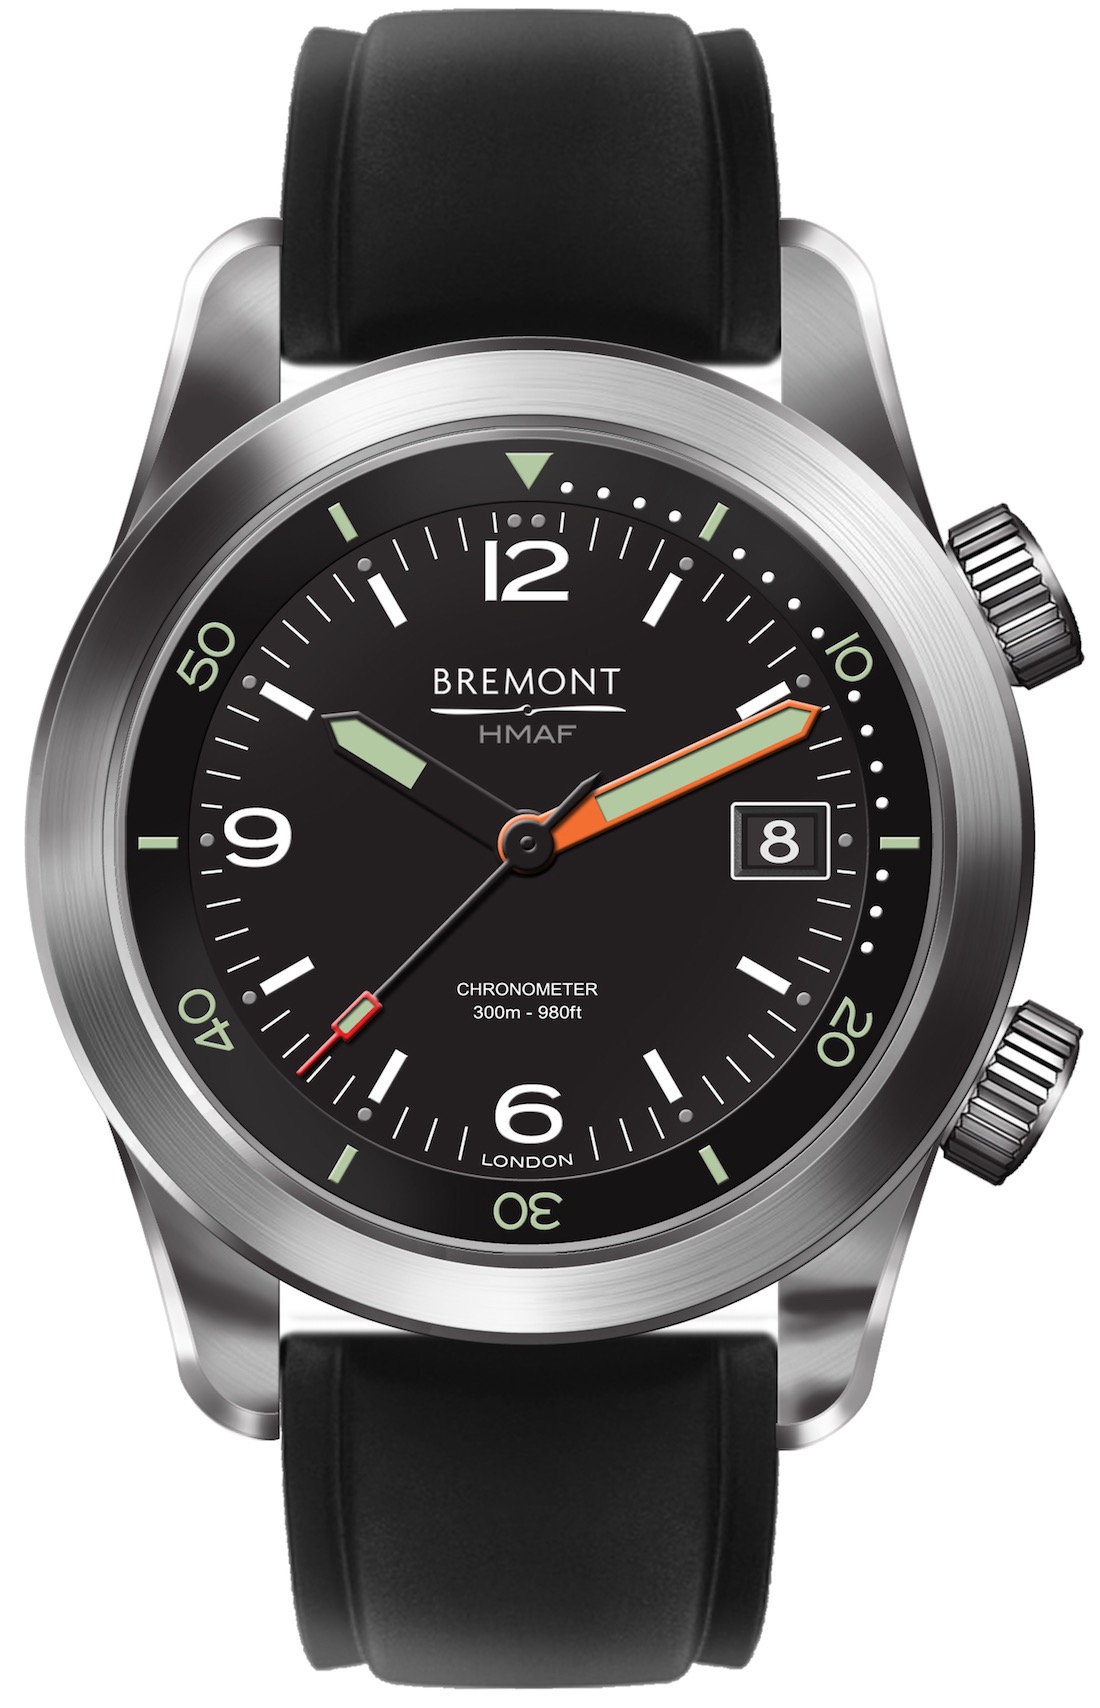 Bremont's new Armed Forces "Ministry of Defense" Collection Bremont-Argonaut